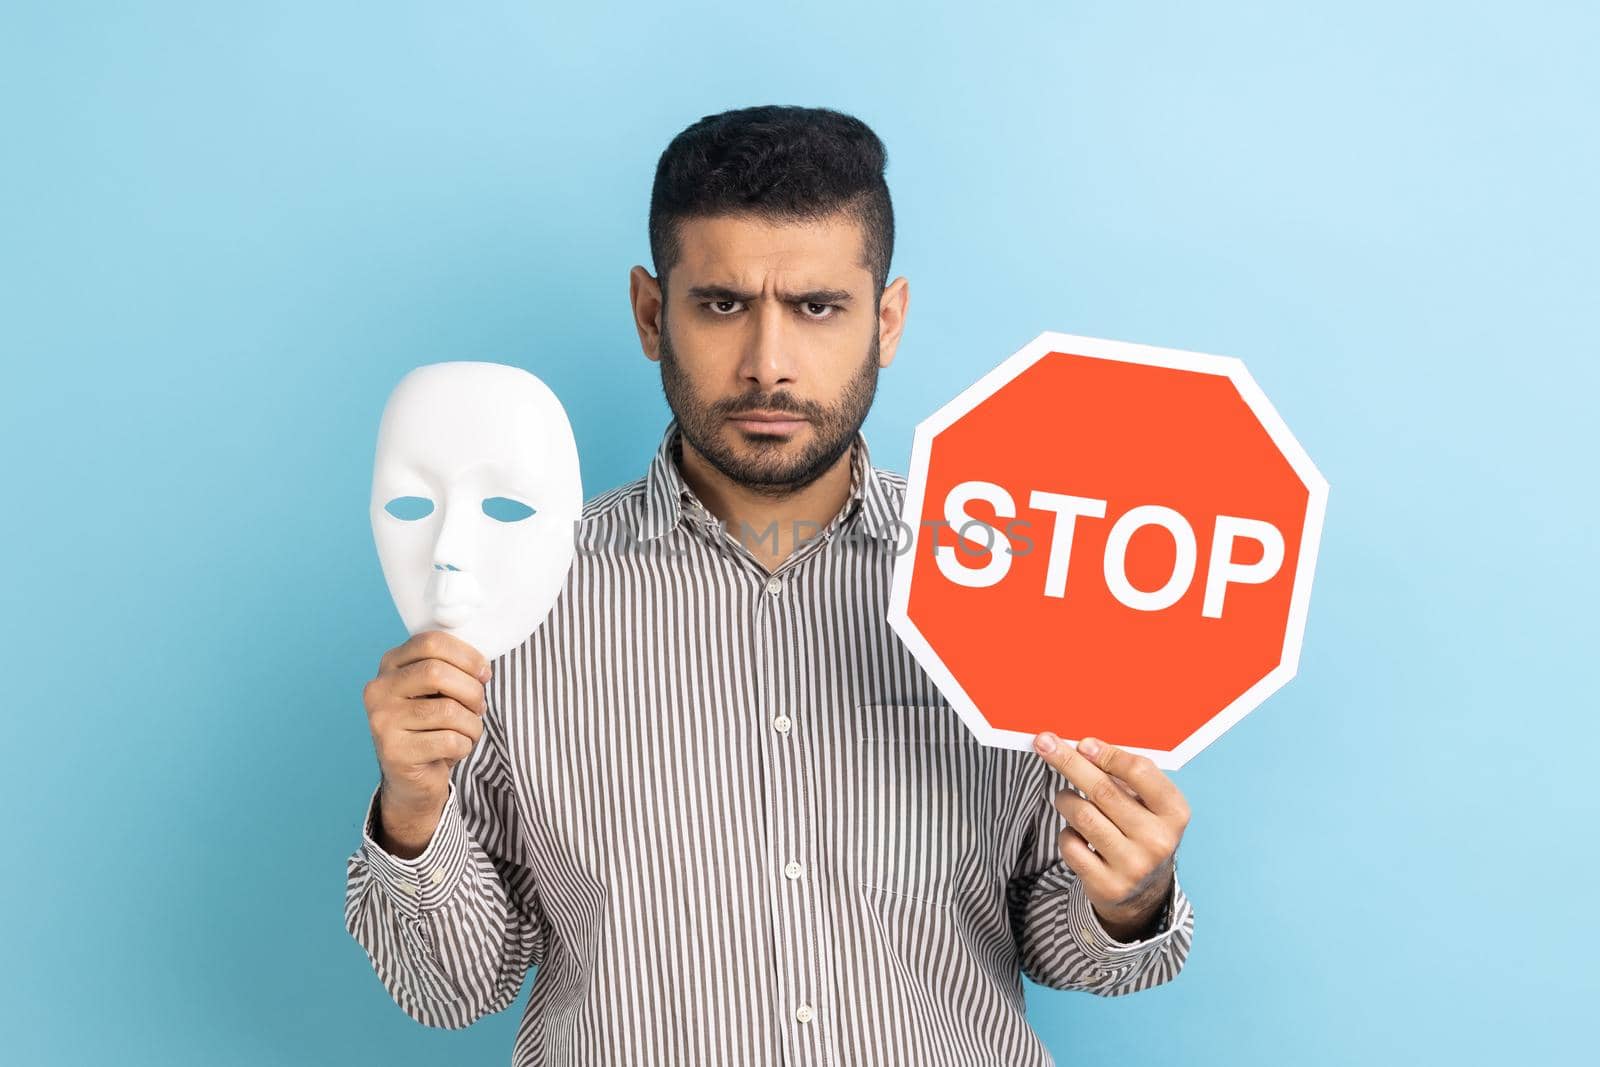 Portrait of serious businessman holding white mask with unknown face and red traffic sign, looking at camera, wearing striped shirt. Indoor studio shot isolated on blue background.